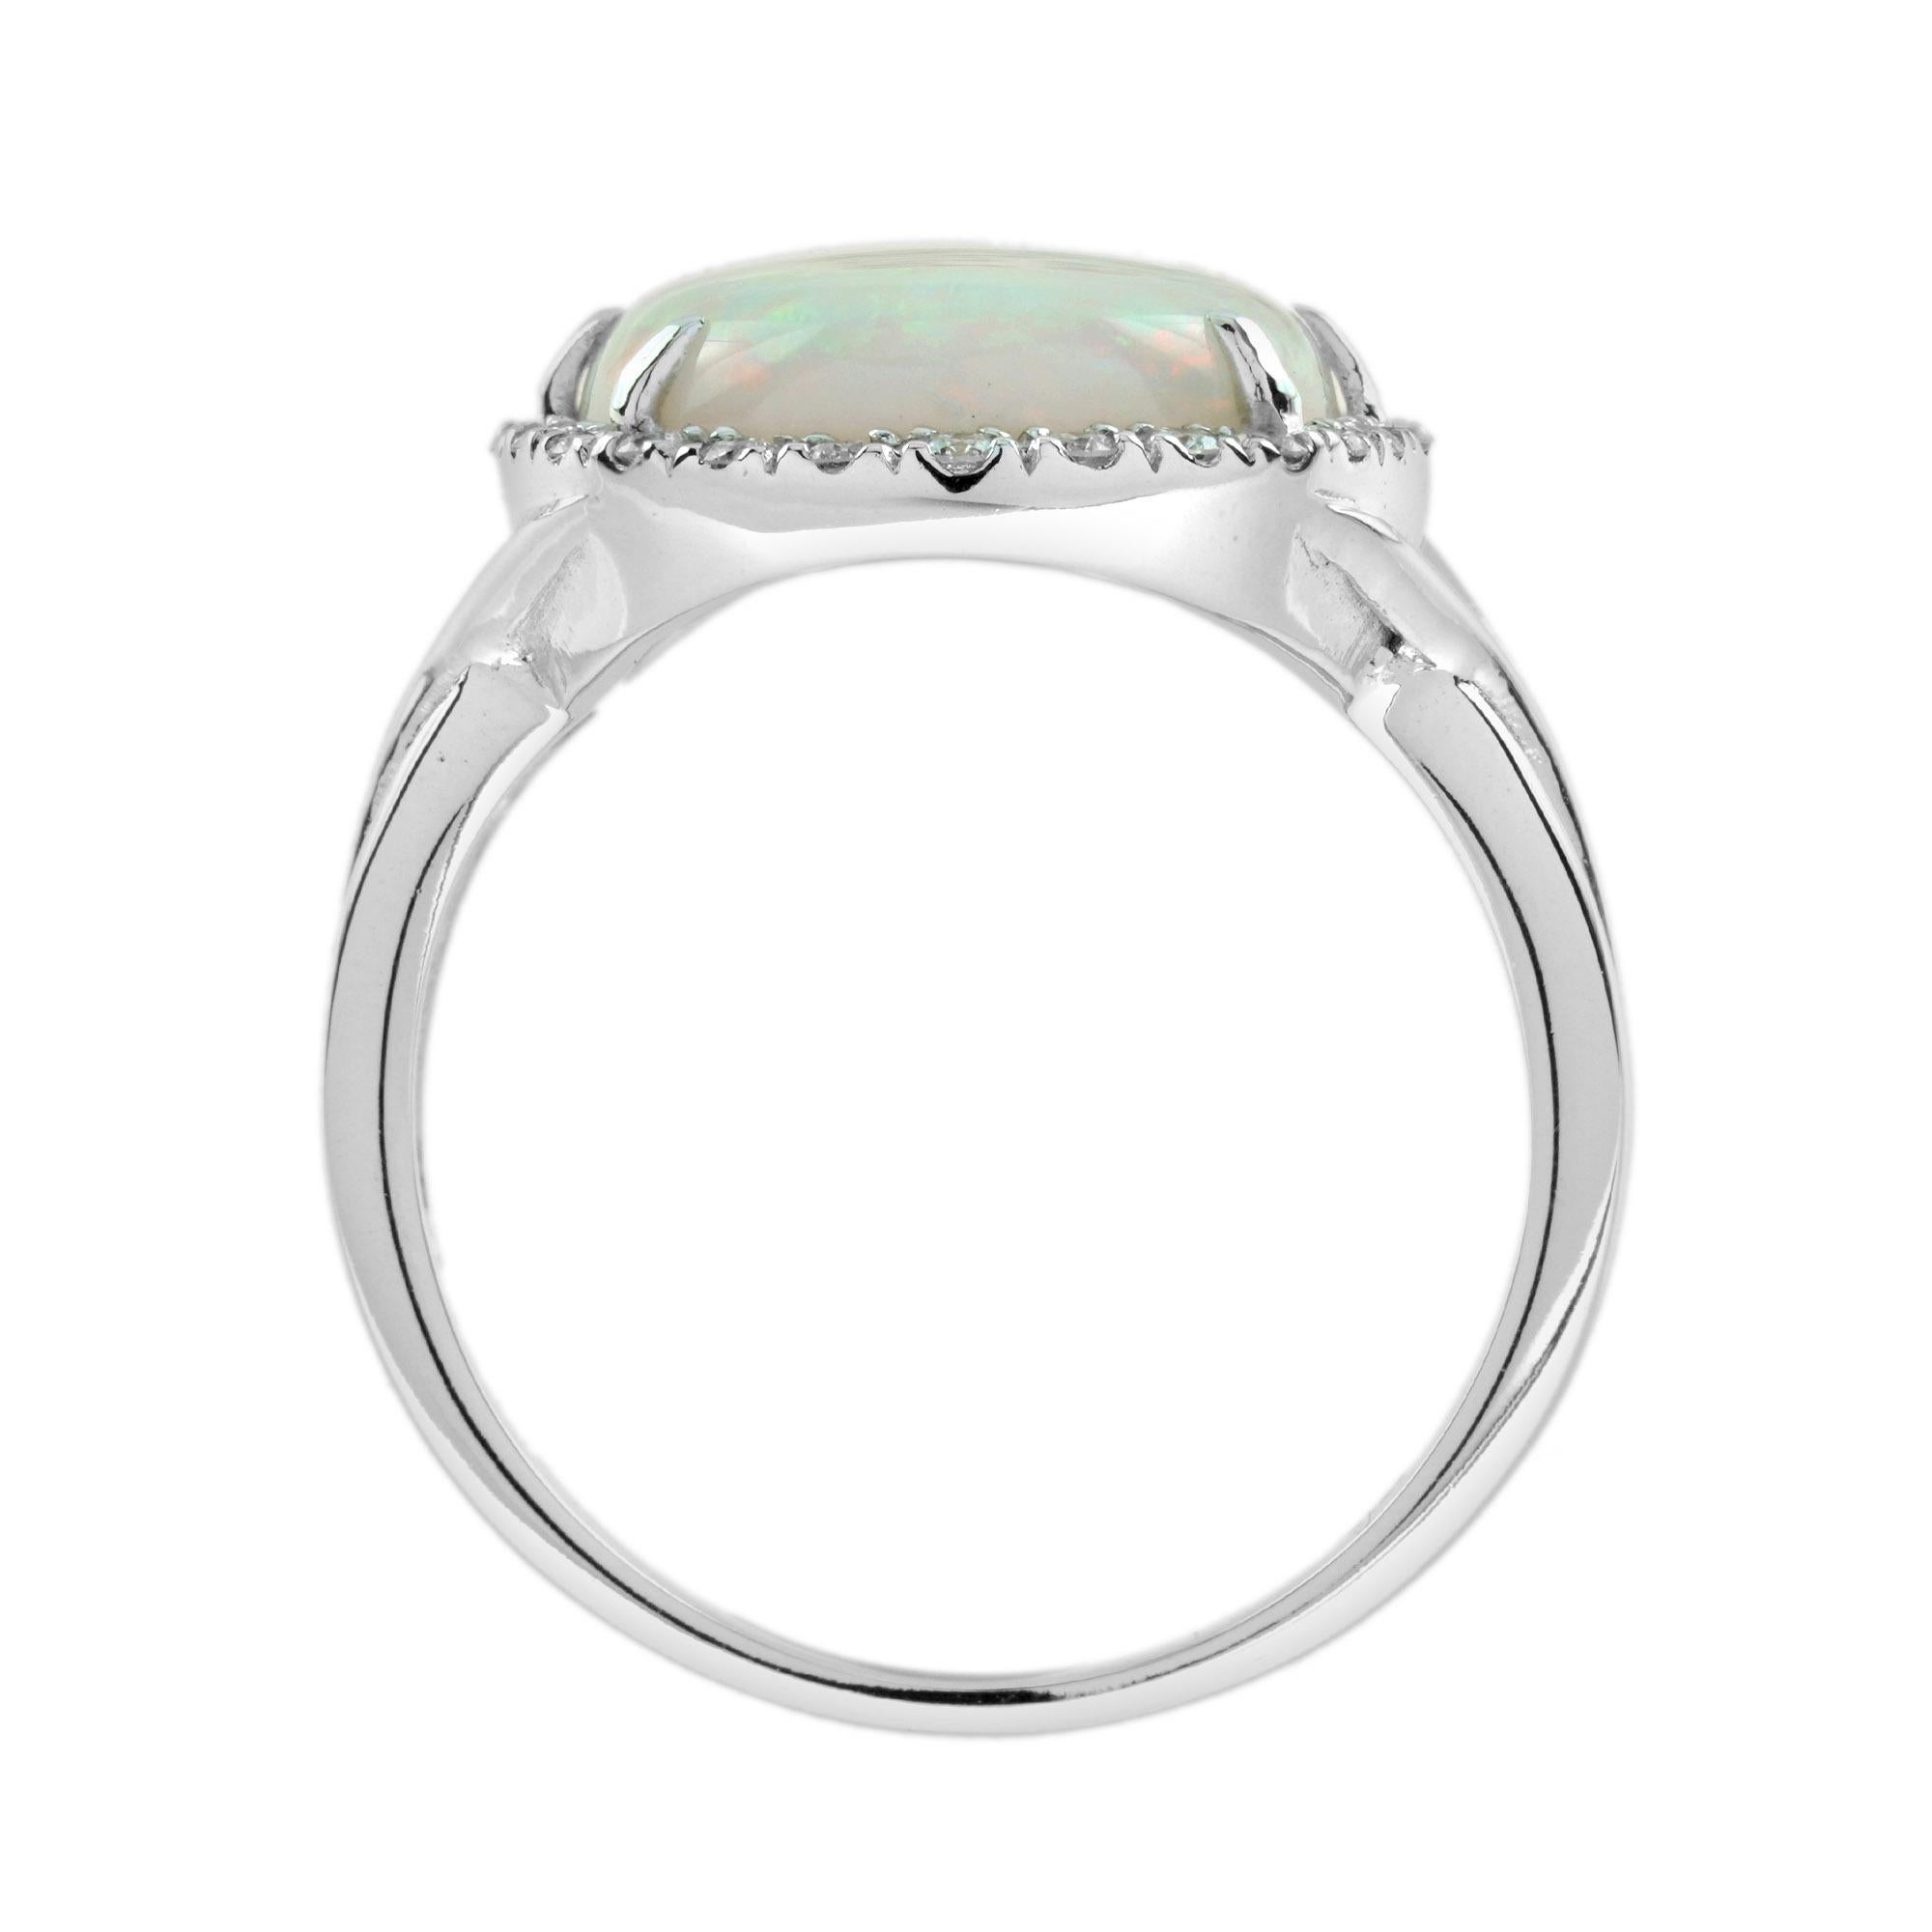 4.22 Ct. Opal and Diamond Vintage Style Cocktail Ring in 18K White Gold For Sale 1